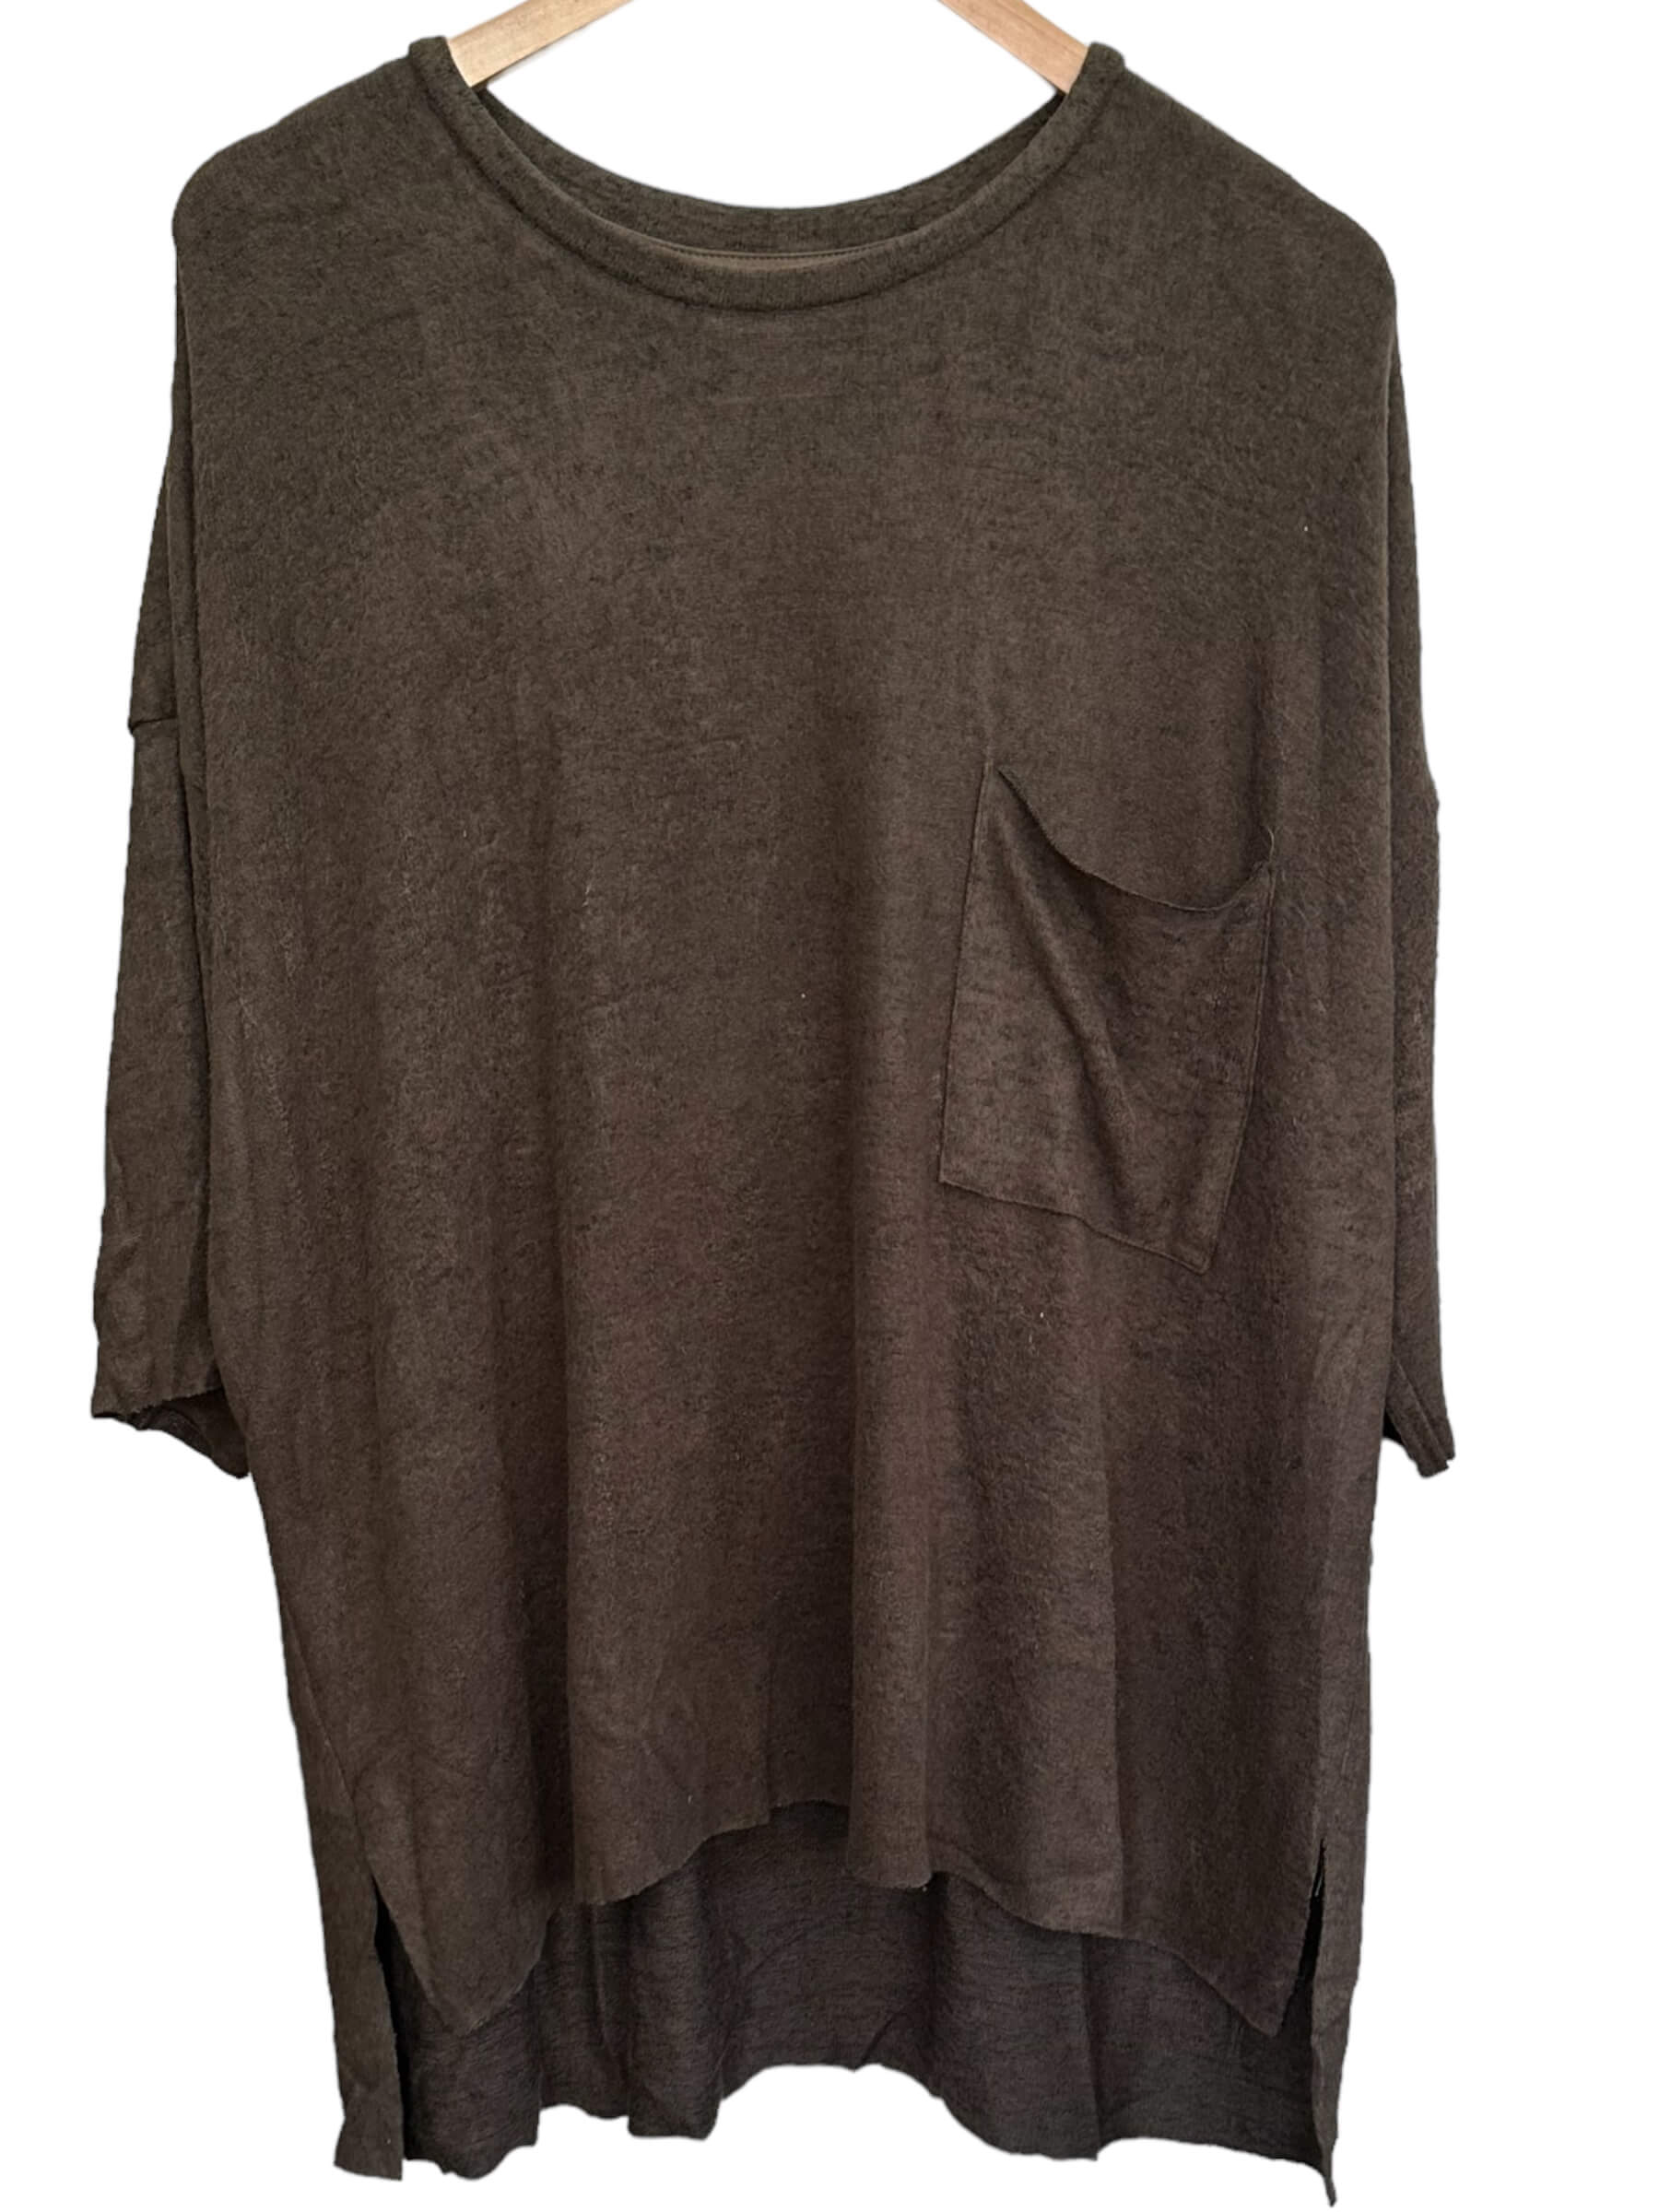 Dark Autumn FOR THE REPUBLIC heathered brown dolman knit pullover